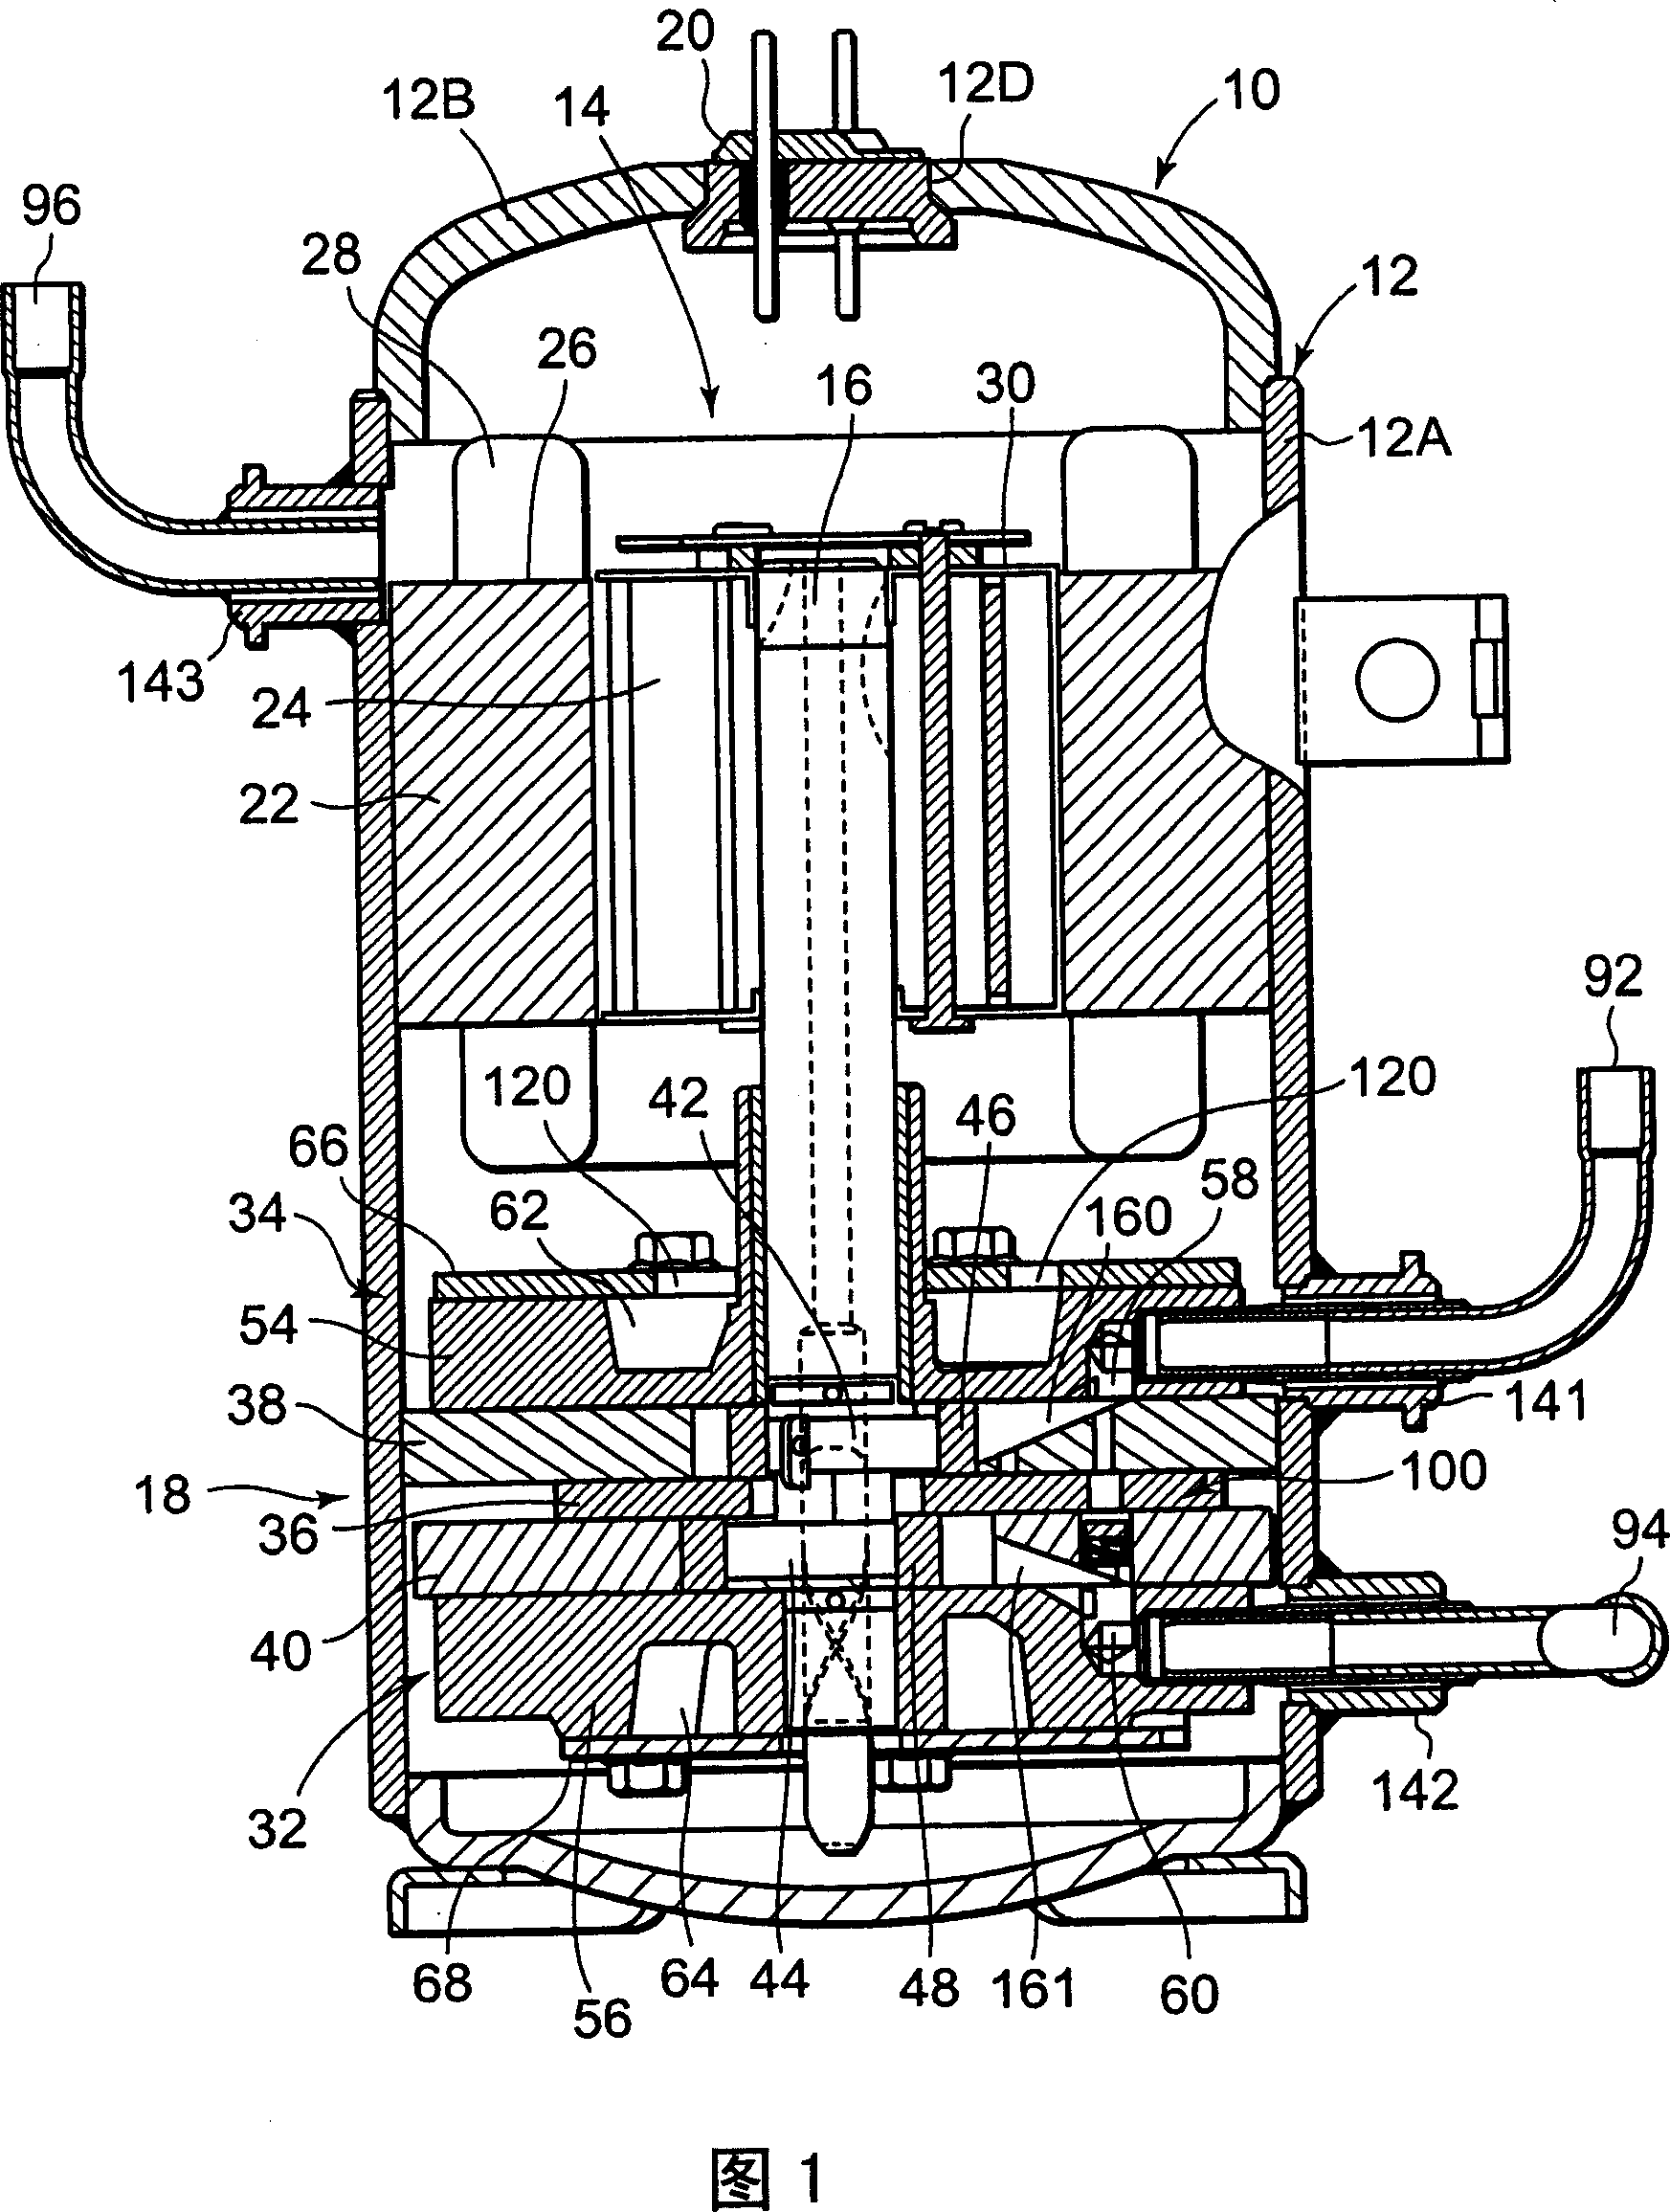 Multistage compression type rotary compressor